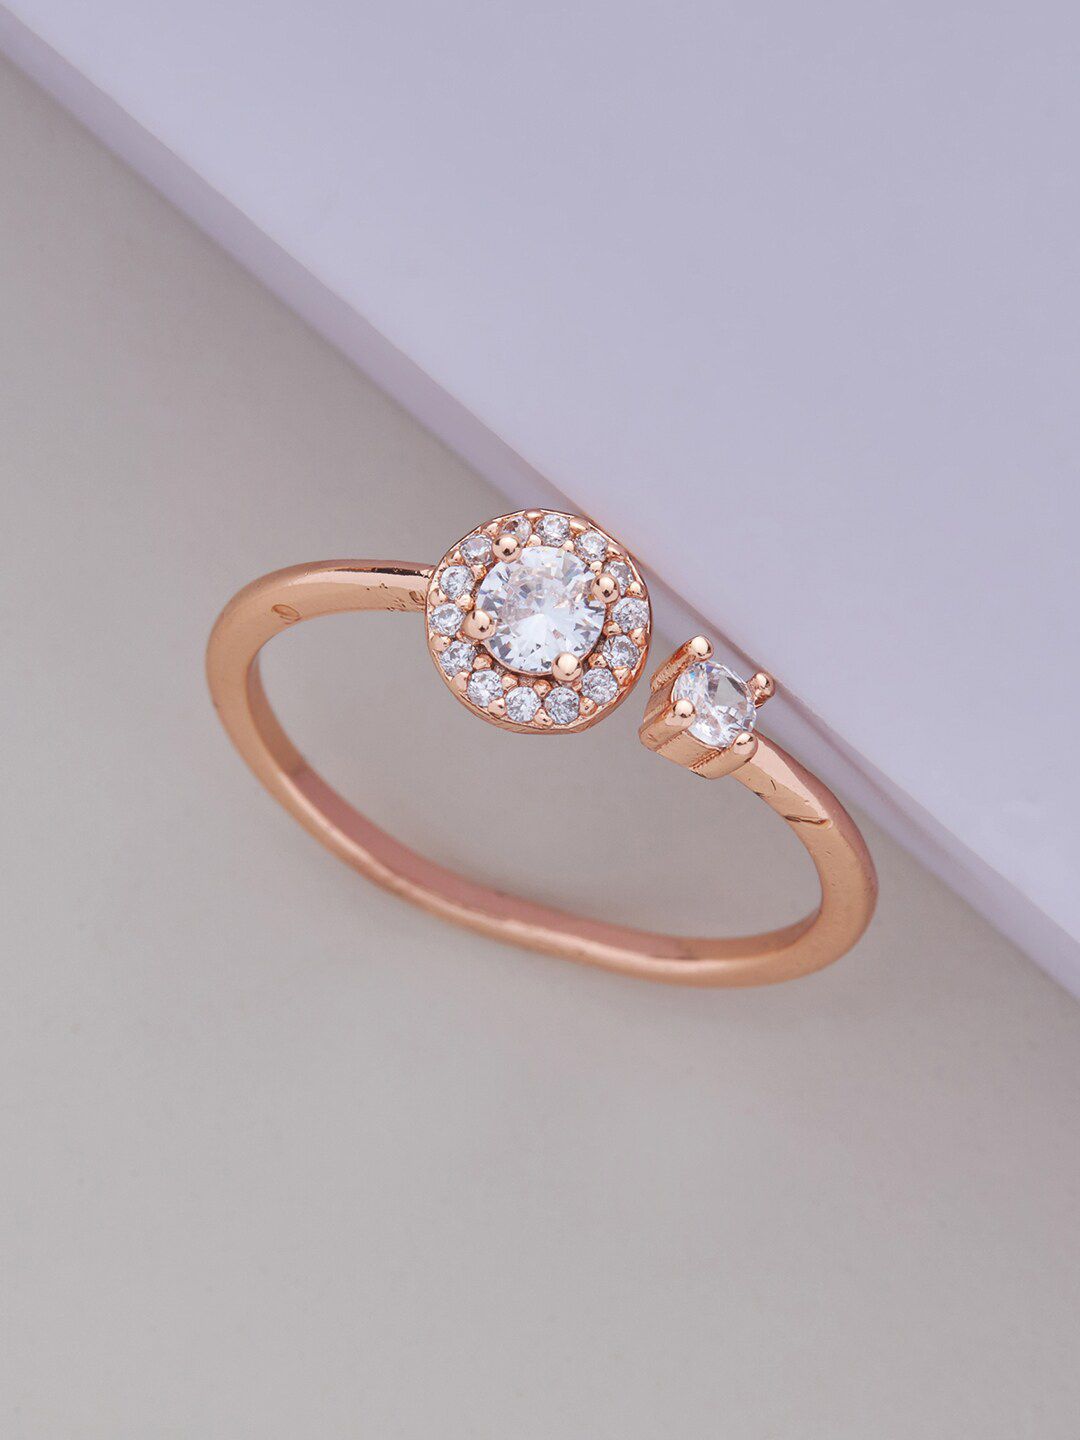 Kushal's Fashion Jewellery Rose Gold-Plated Zirconia Studded Adjustable Ring Price in India